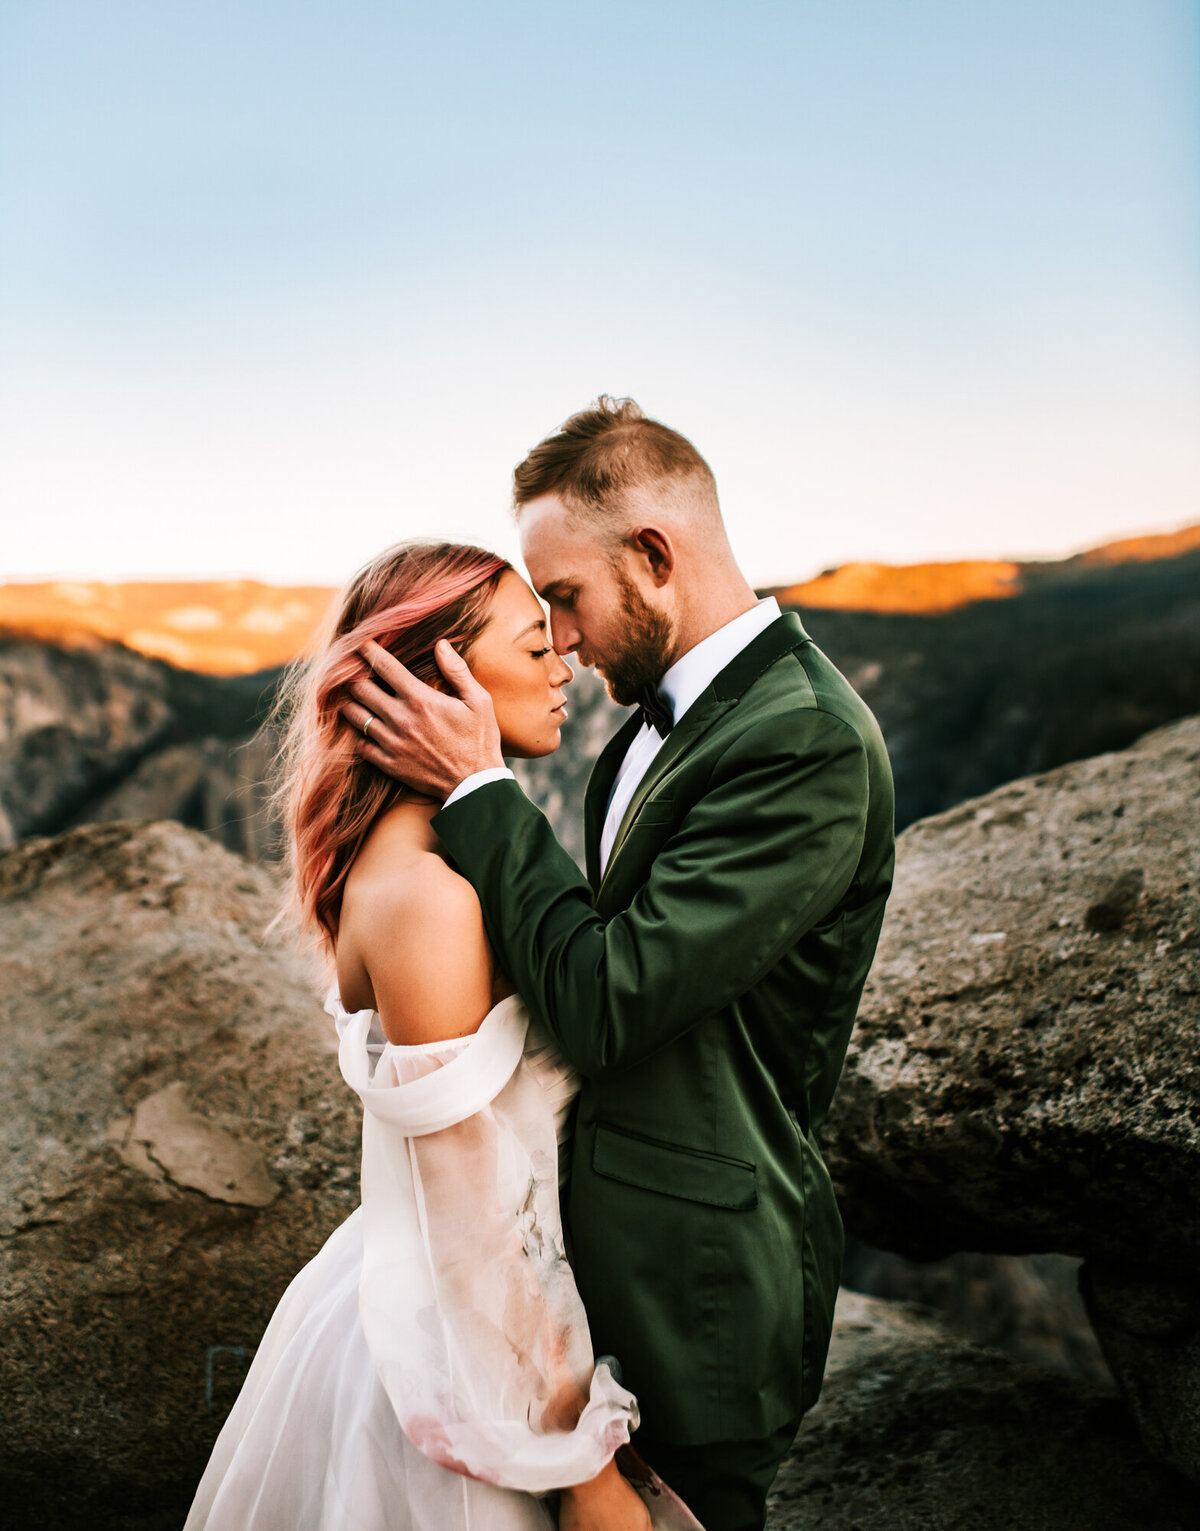 Couples Photography, a groom in a suit and a woman in her wedding dress draw close, face to face on the mountain top